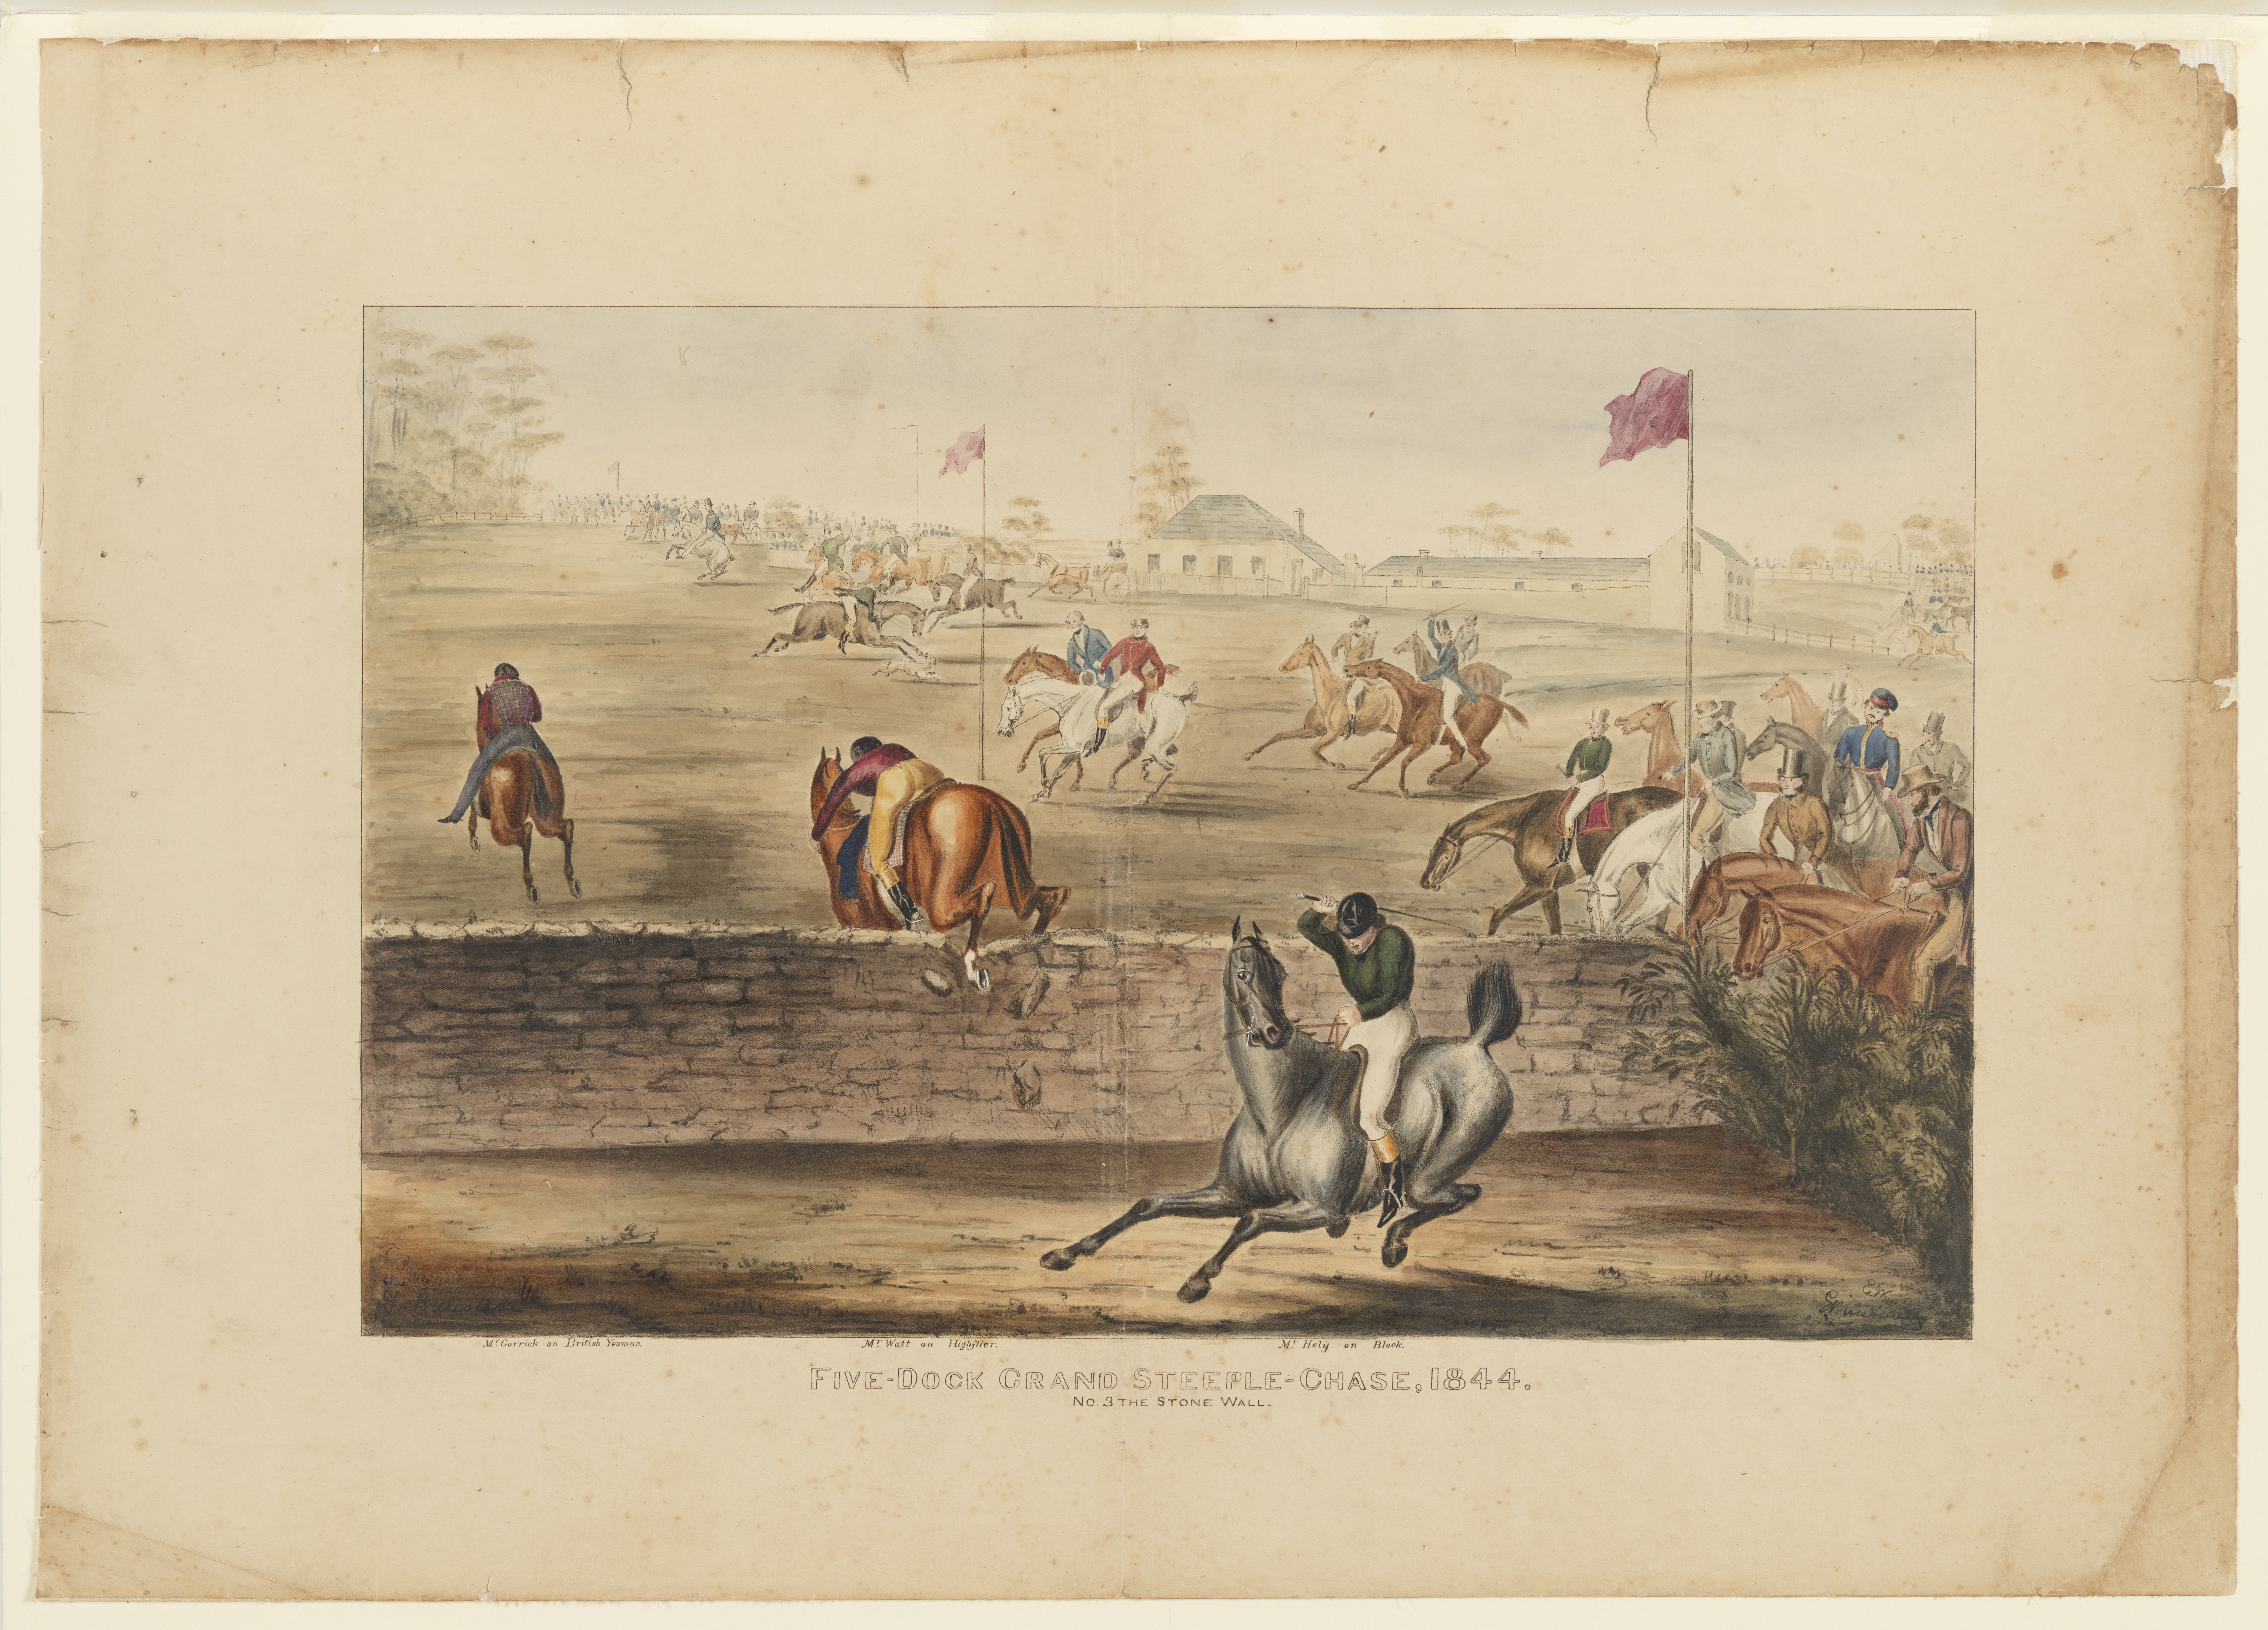 Lively painting of the Five Dock Grand Steeple Chase - held in 1844 at Russell Lea 